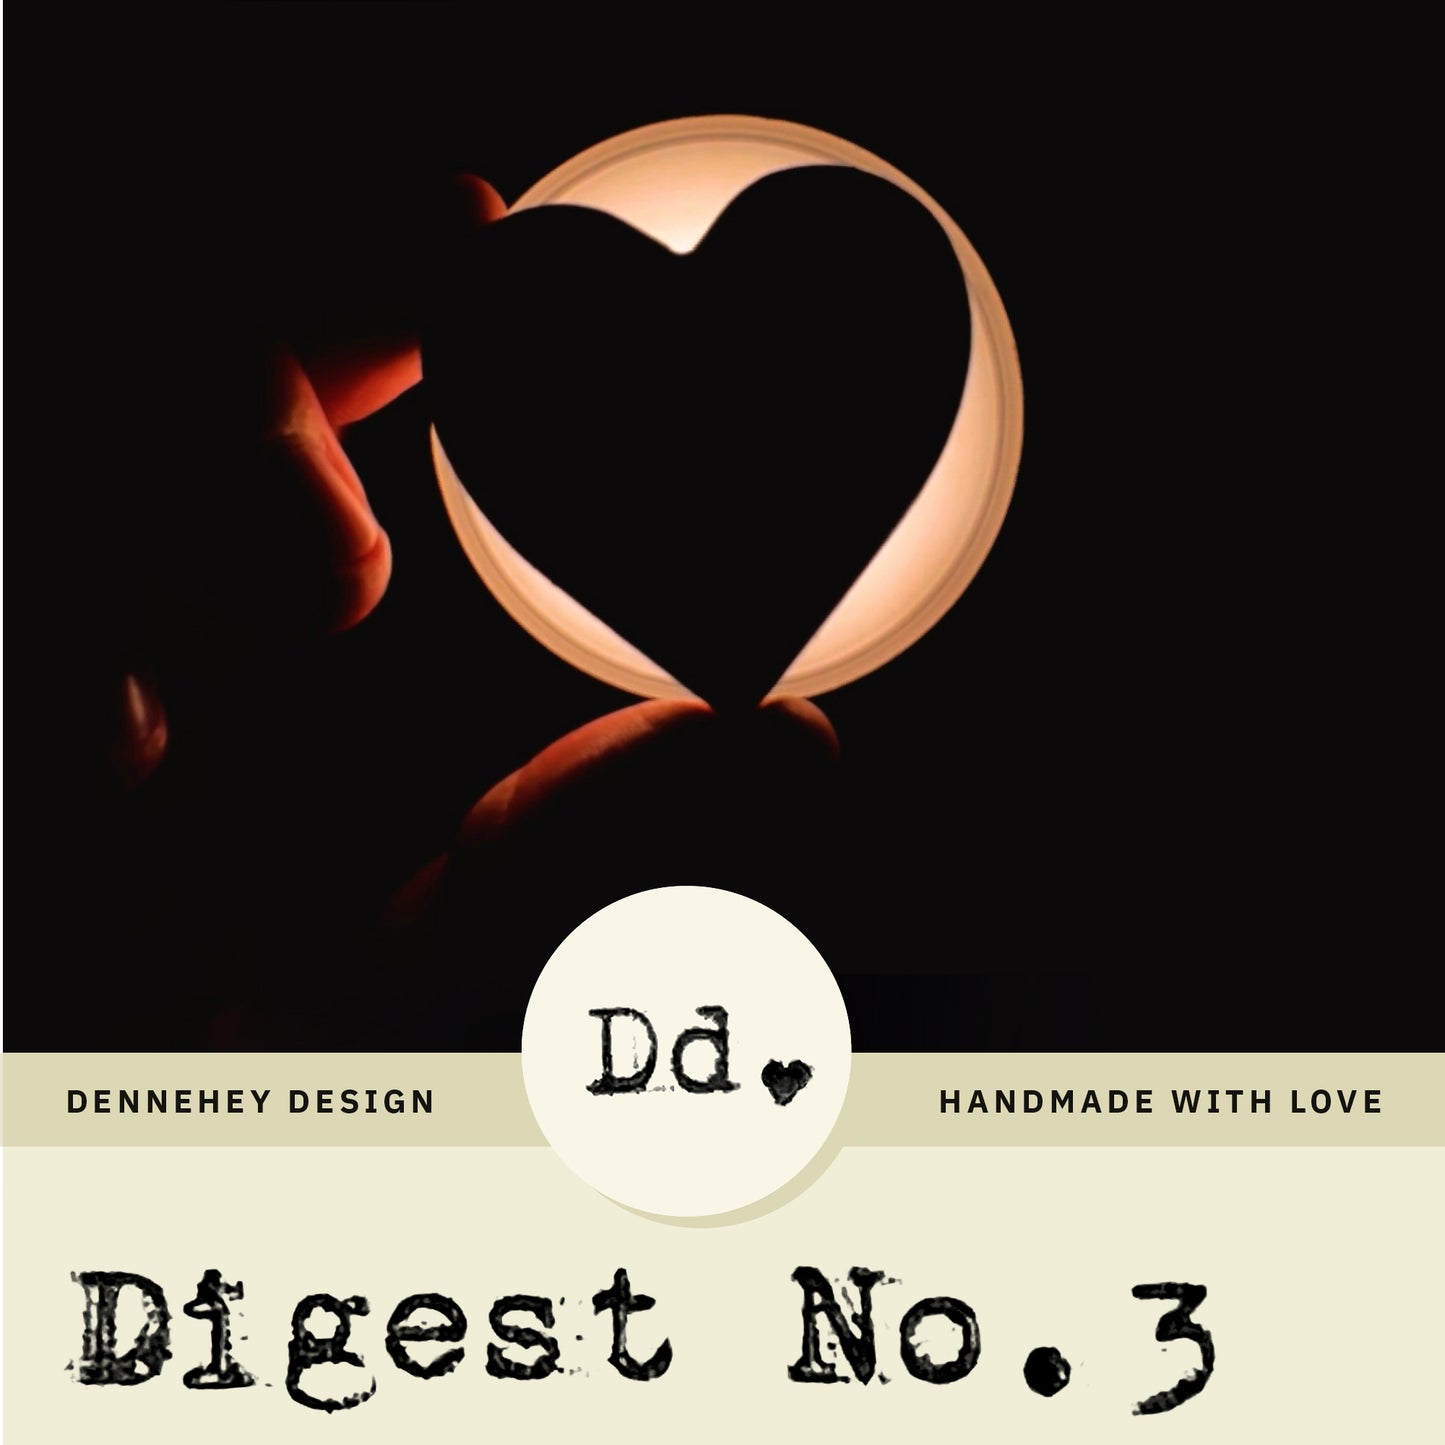 Digest No. 3 :: Total Eclipse of the Heart